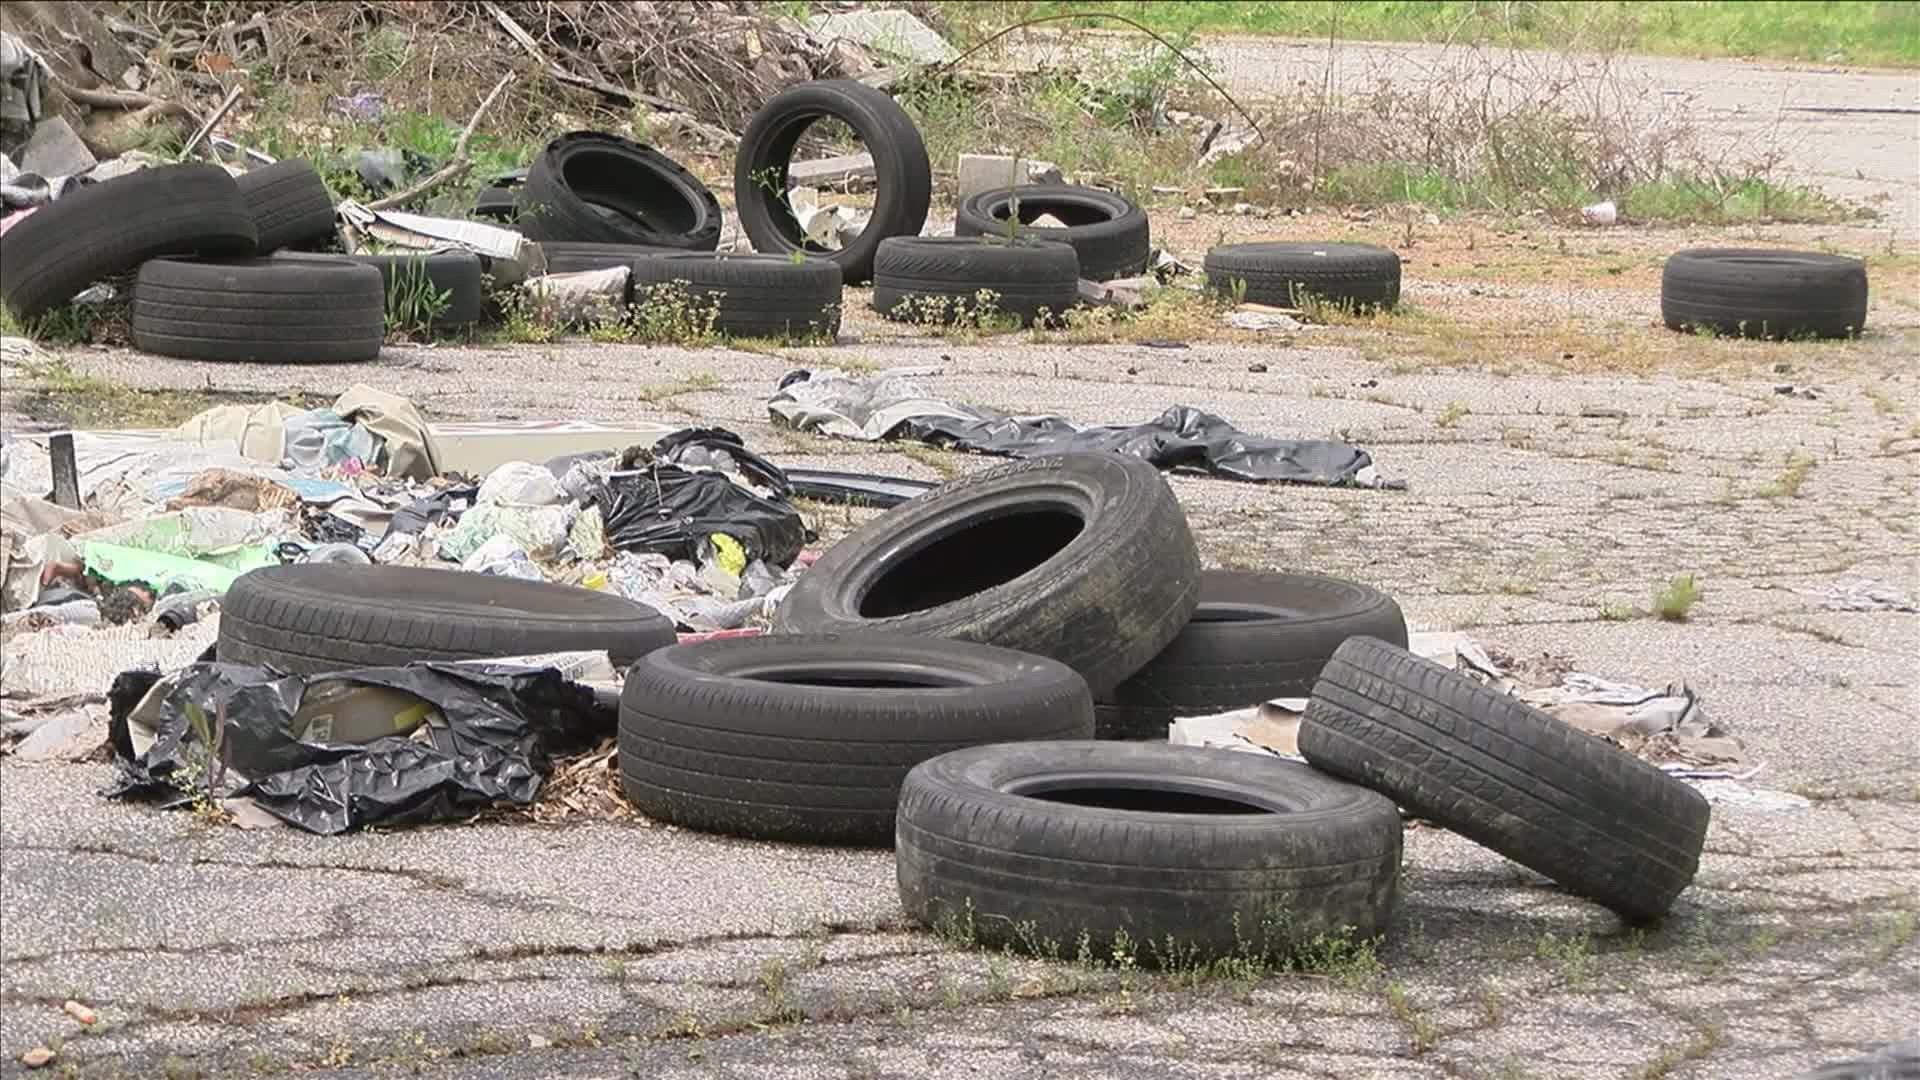 A new proposal would form a team whose only job is to address illegal dumping complaints.